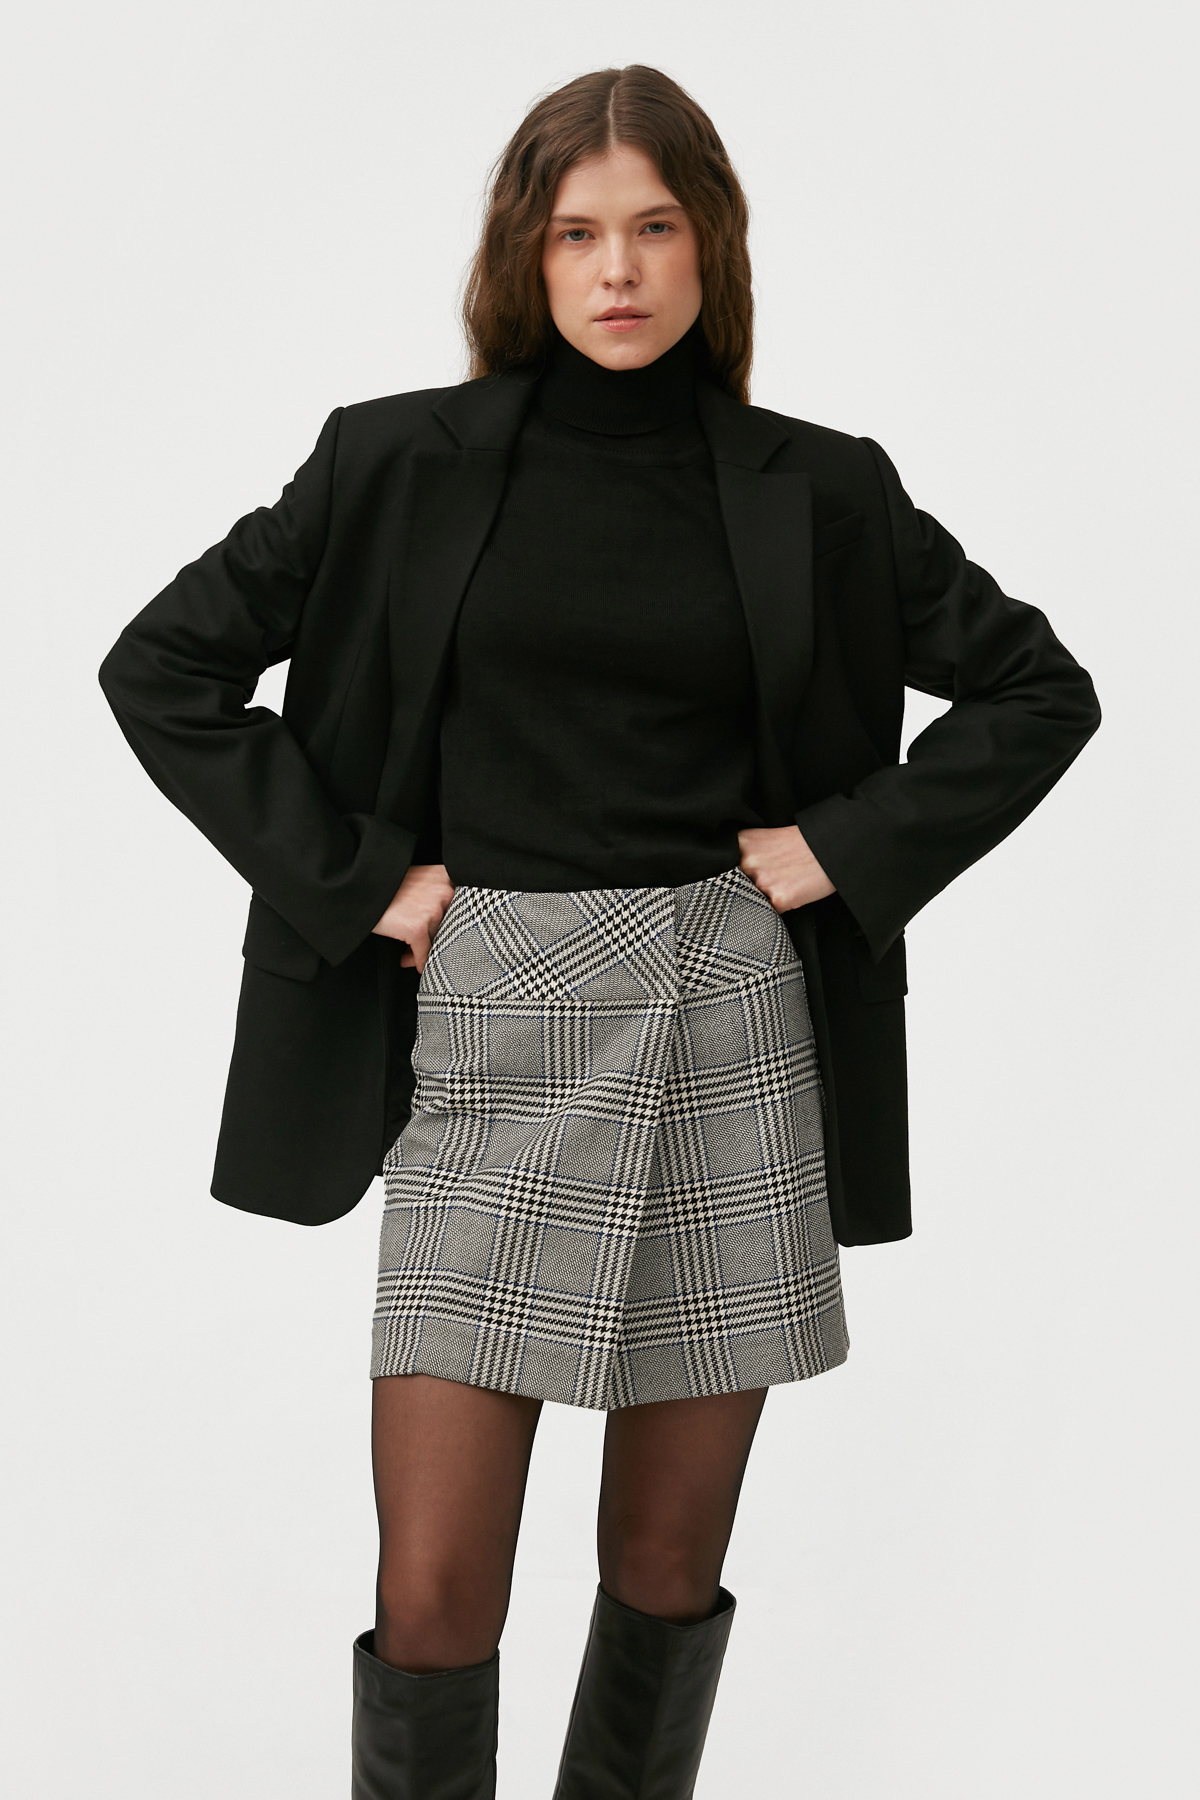 Short skirt made of plaid suiting fabric, photo 2